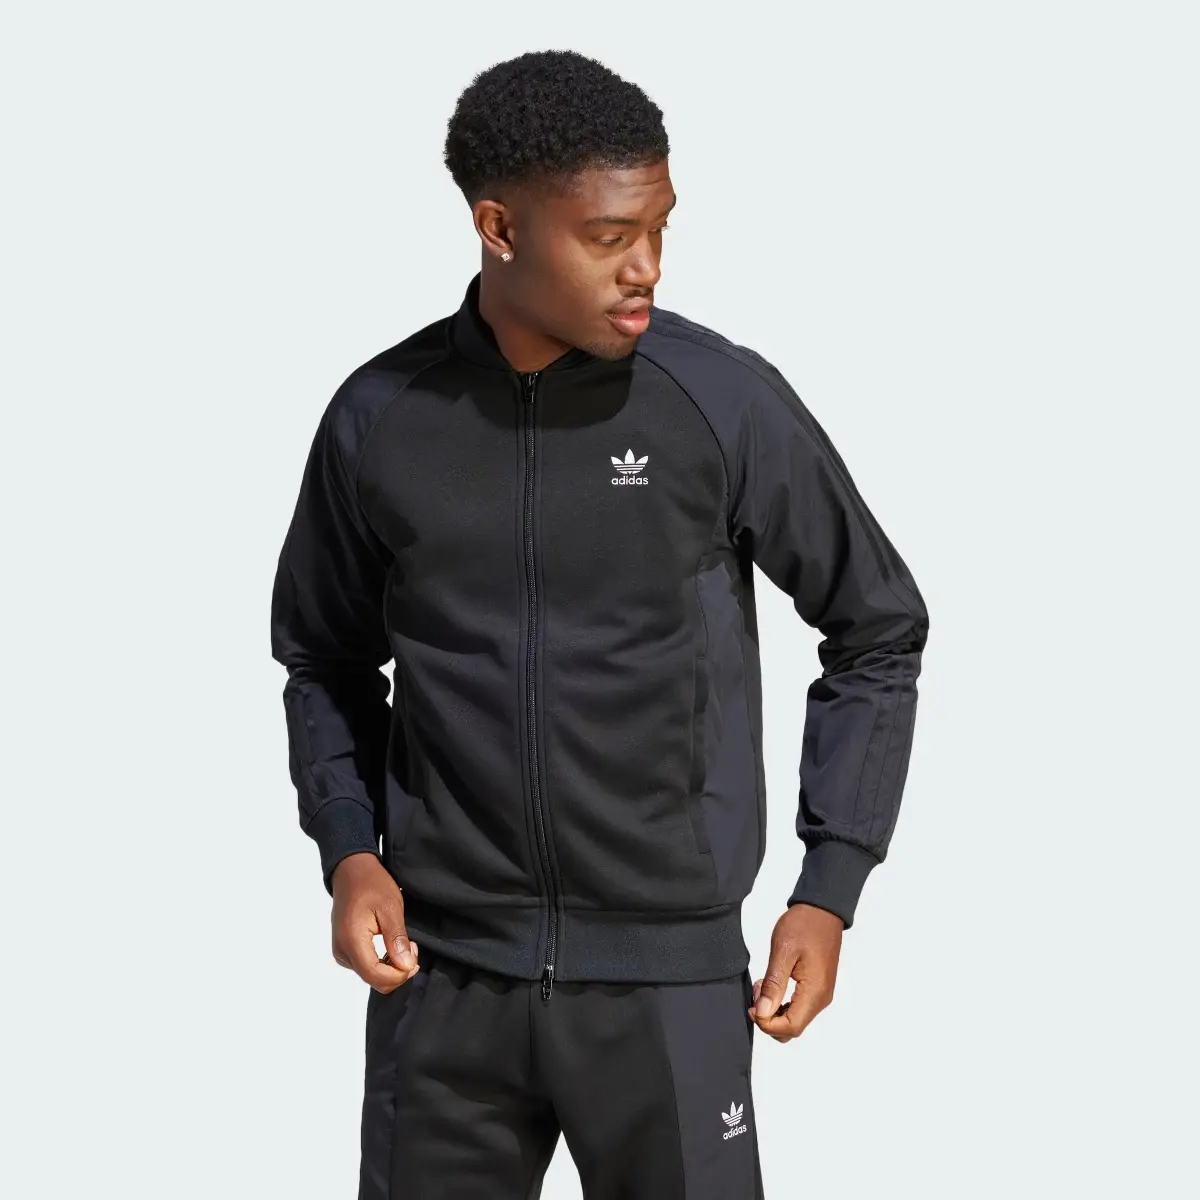 Adidas Track jacket adicolor Re-Pro SST Material Mix. 2